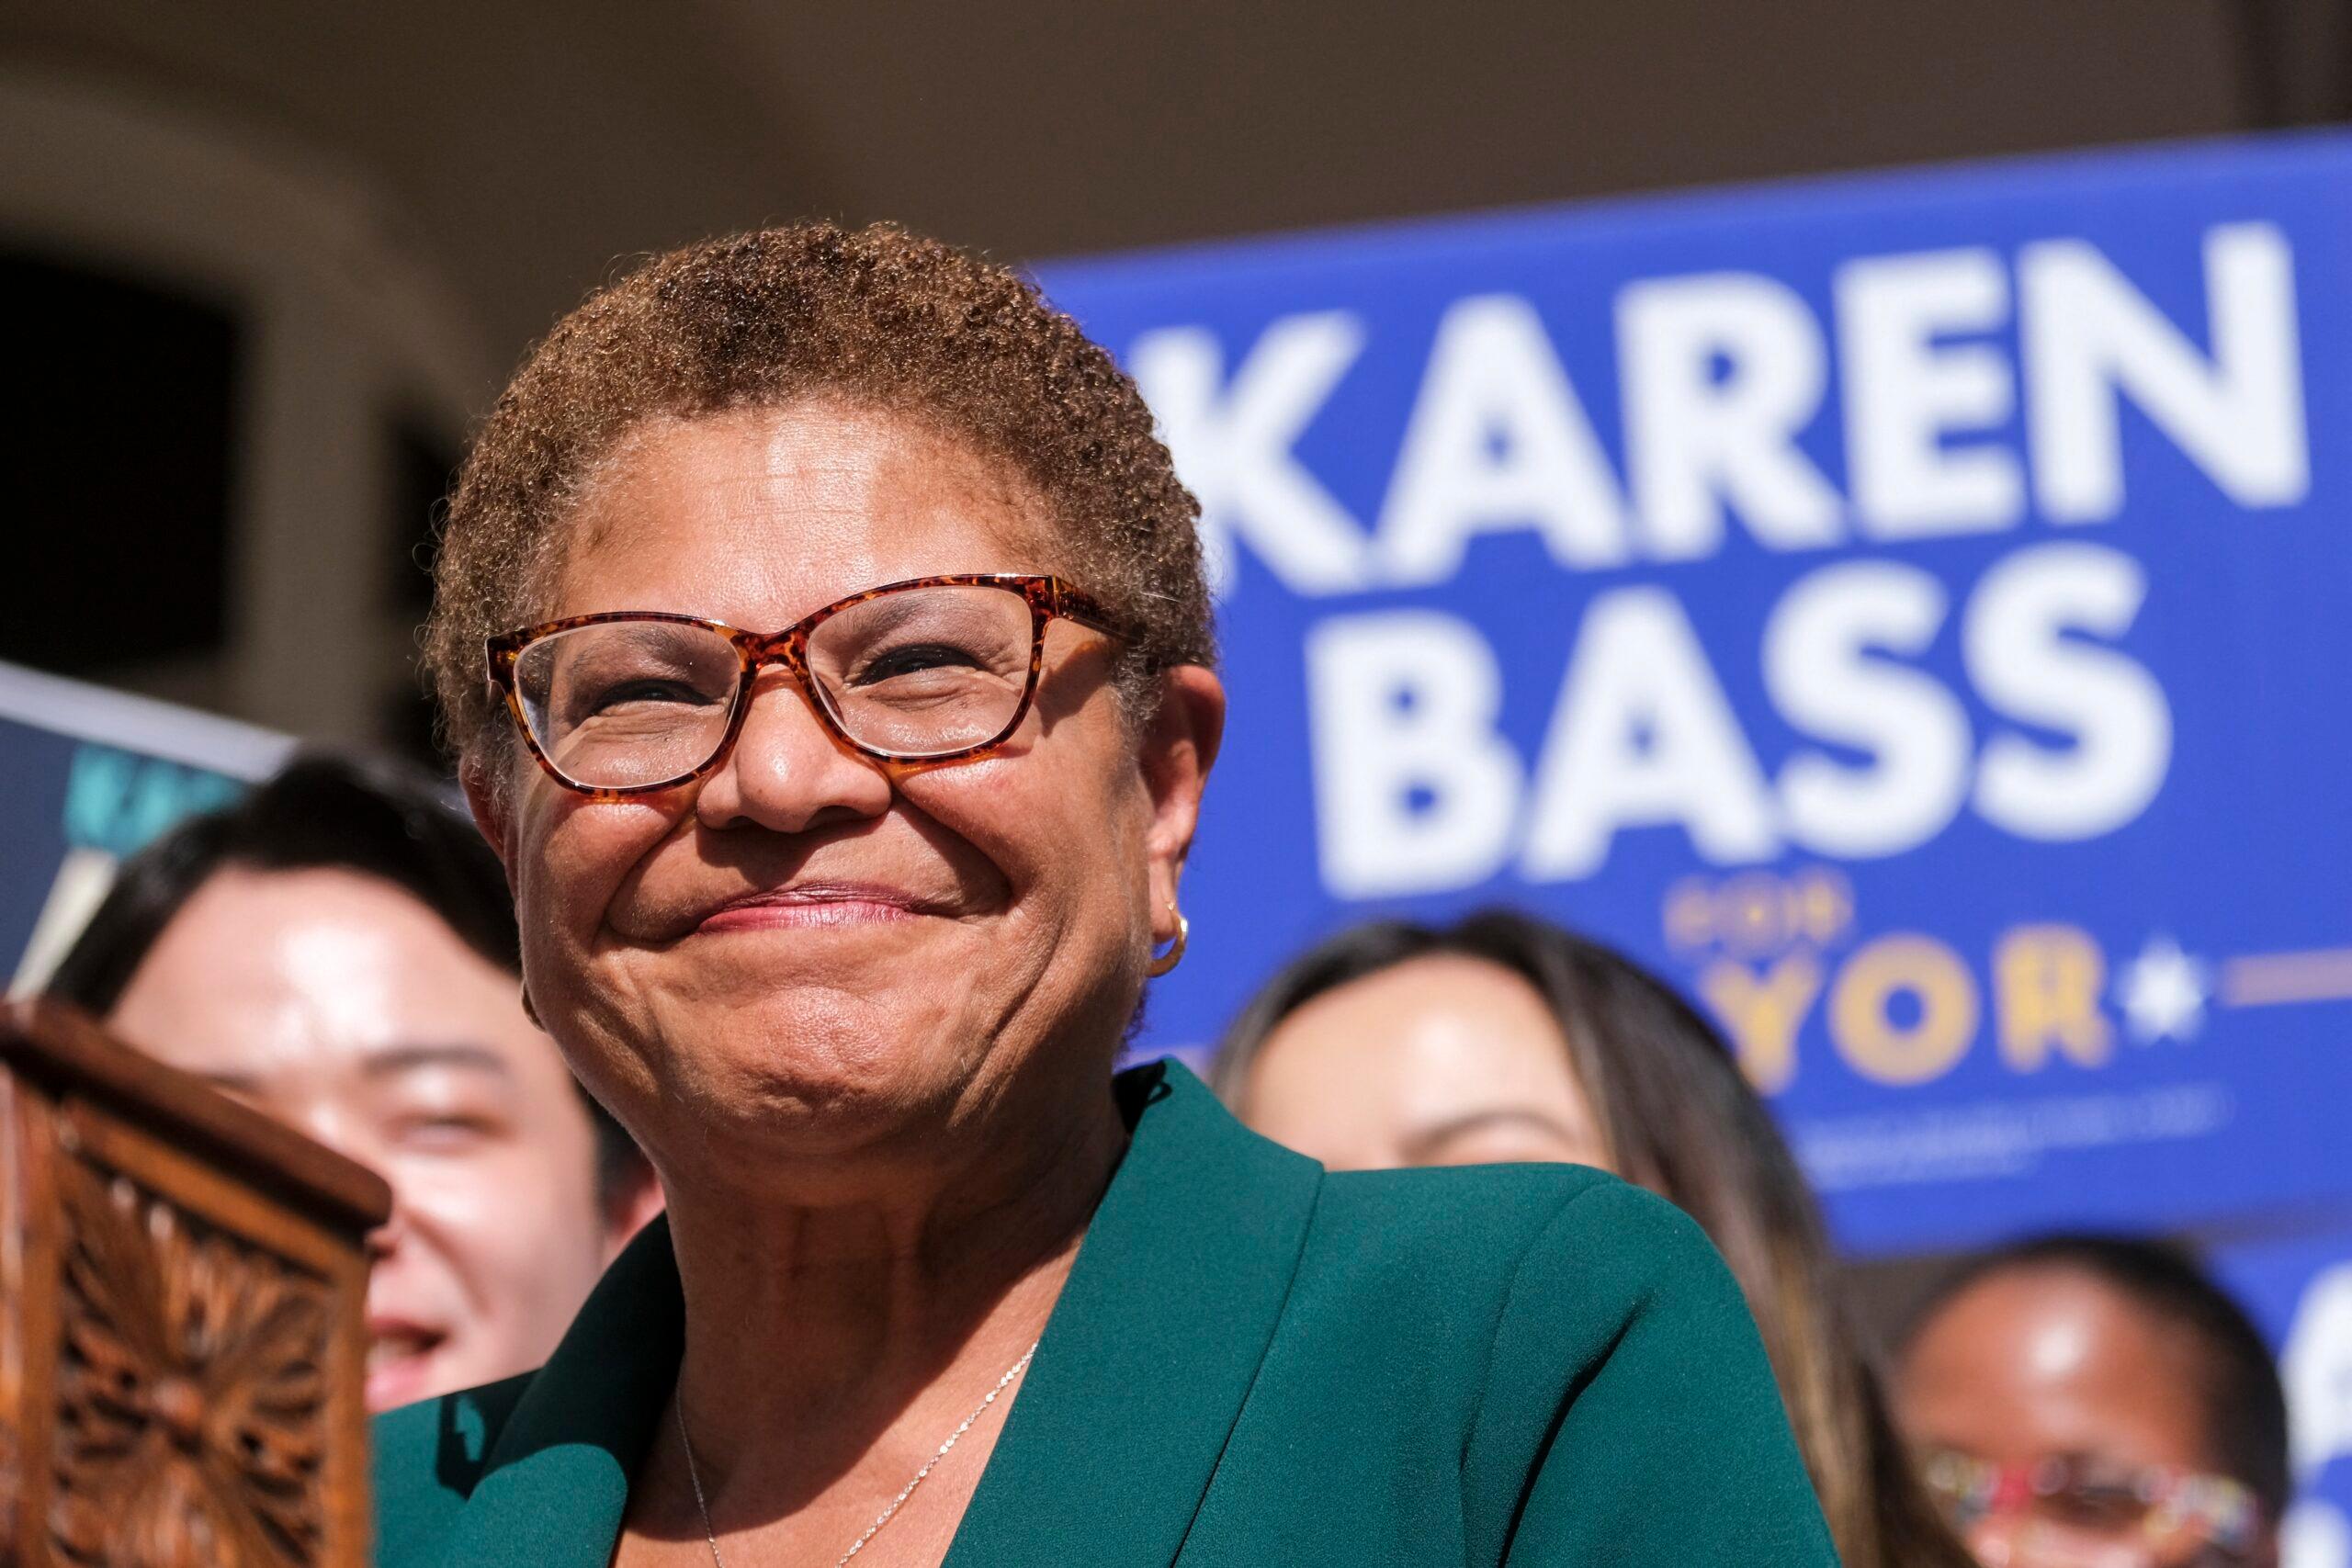 Mayor Karen Bass spoke in a media conference to make ''brief remarks'' to discuss her election victory